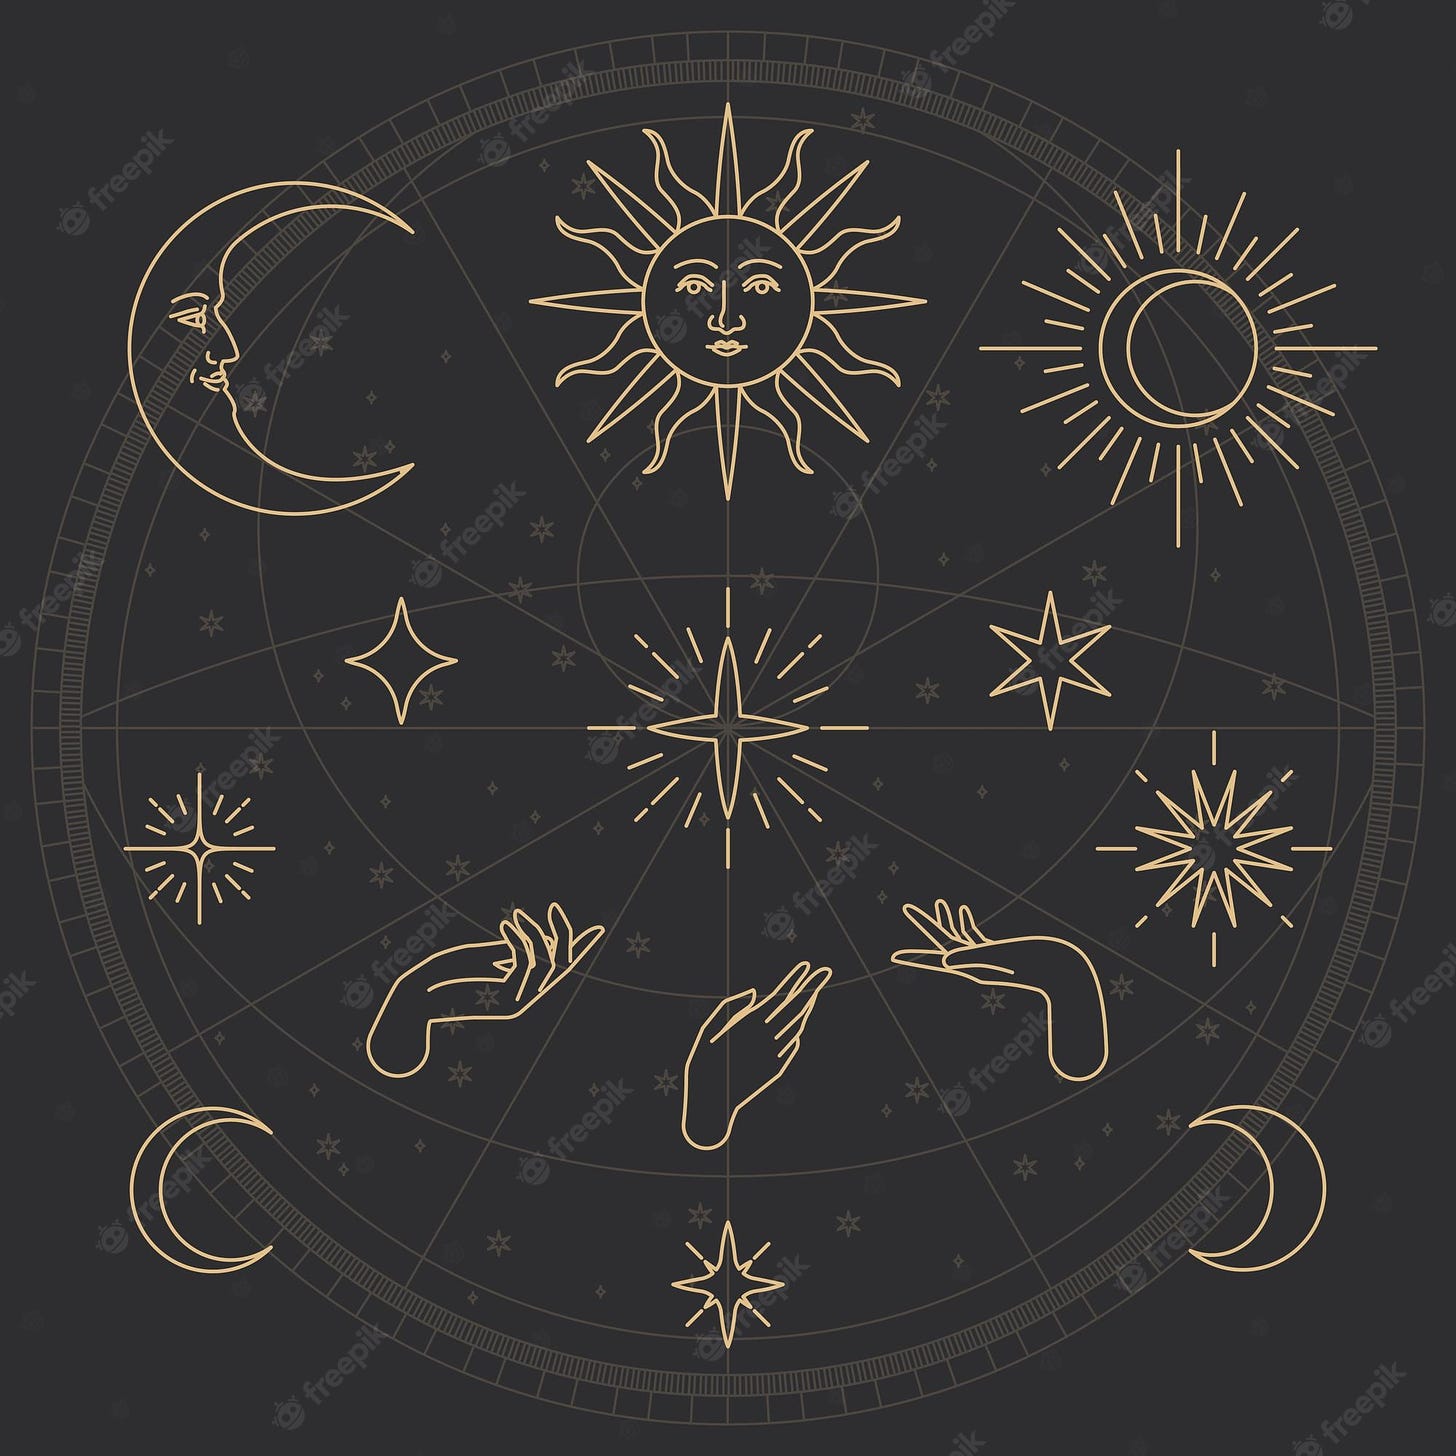 Astrology Logo - Free Vectors & PSDs to Download